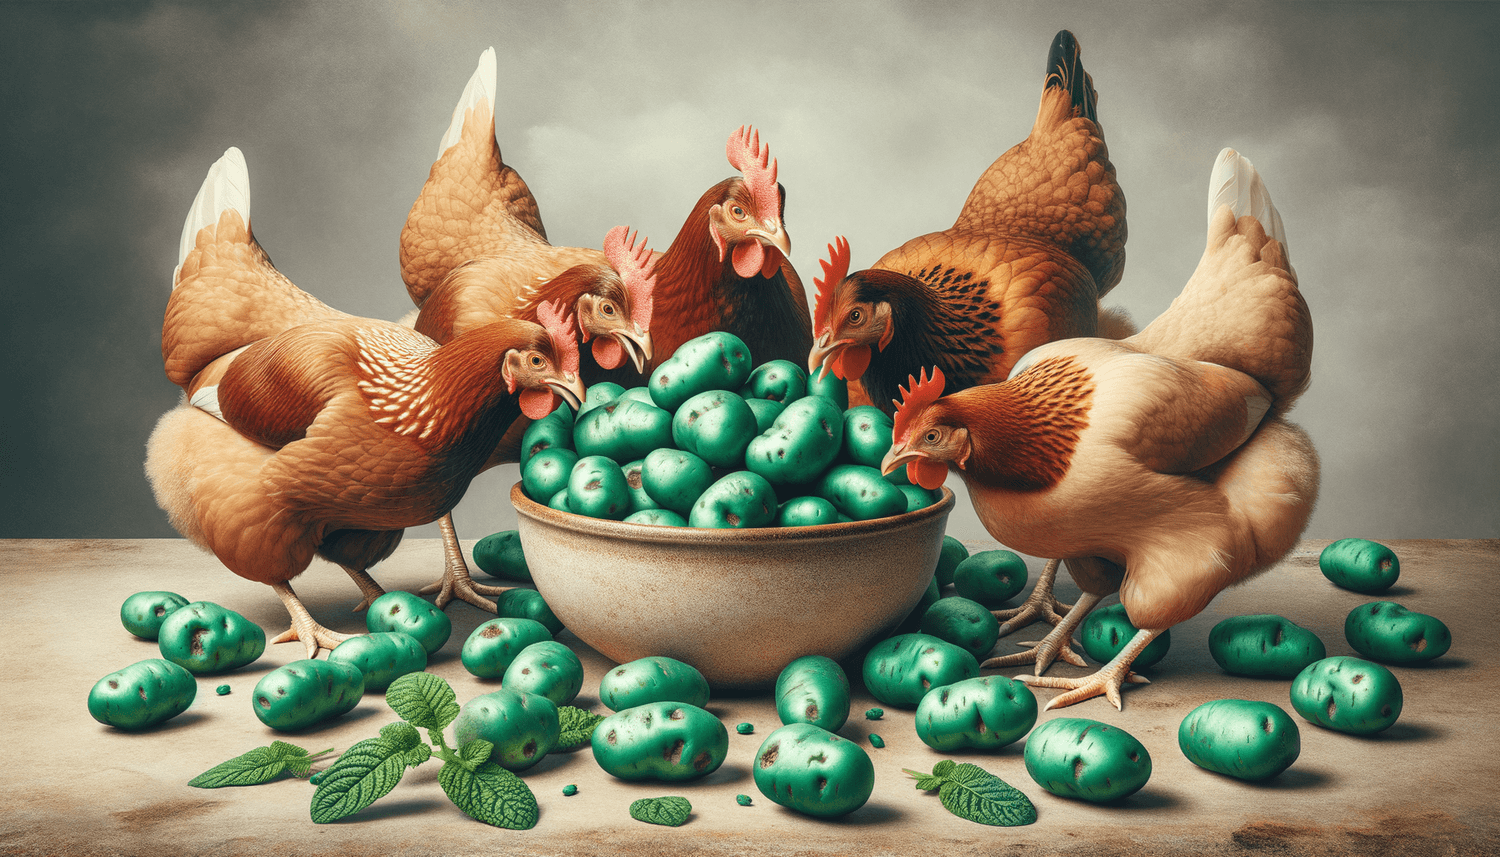 Can Chickens Eat Green Potatoes?